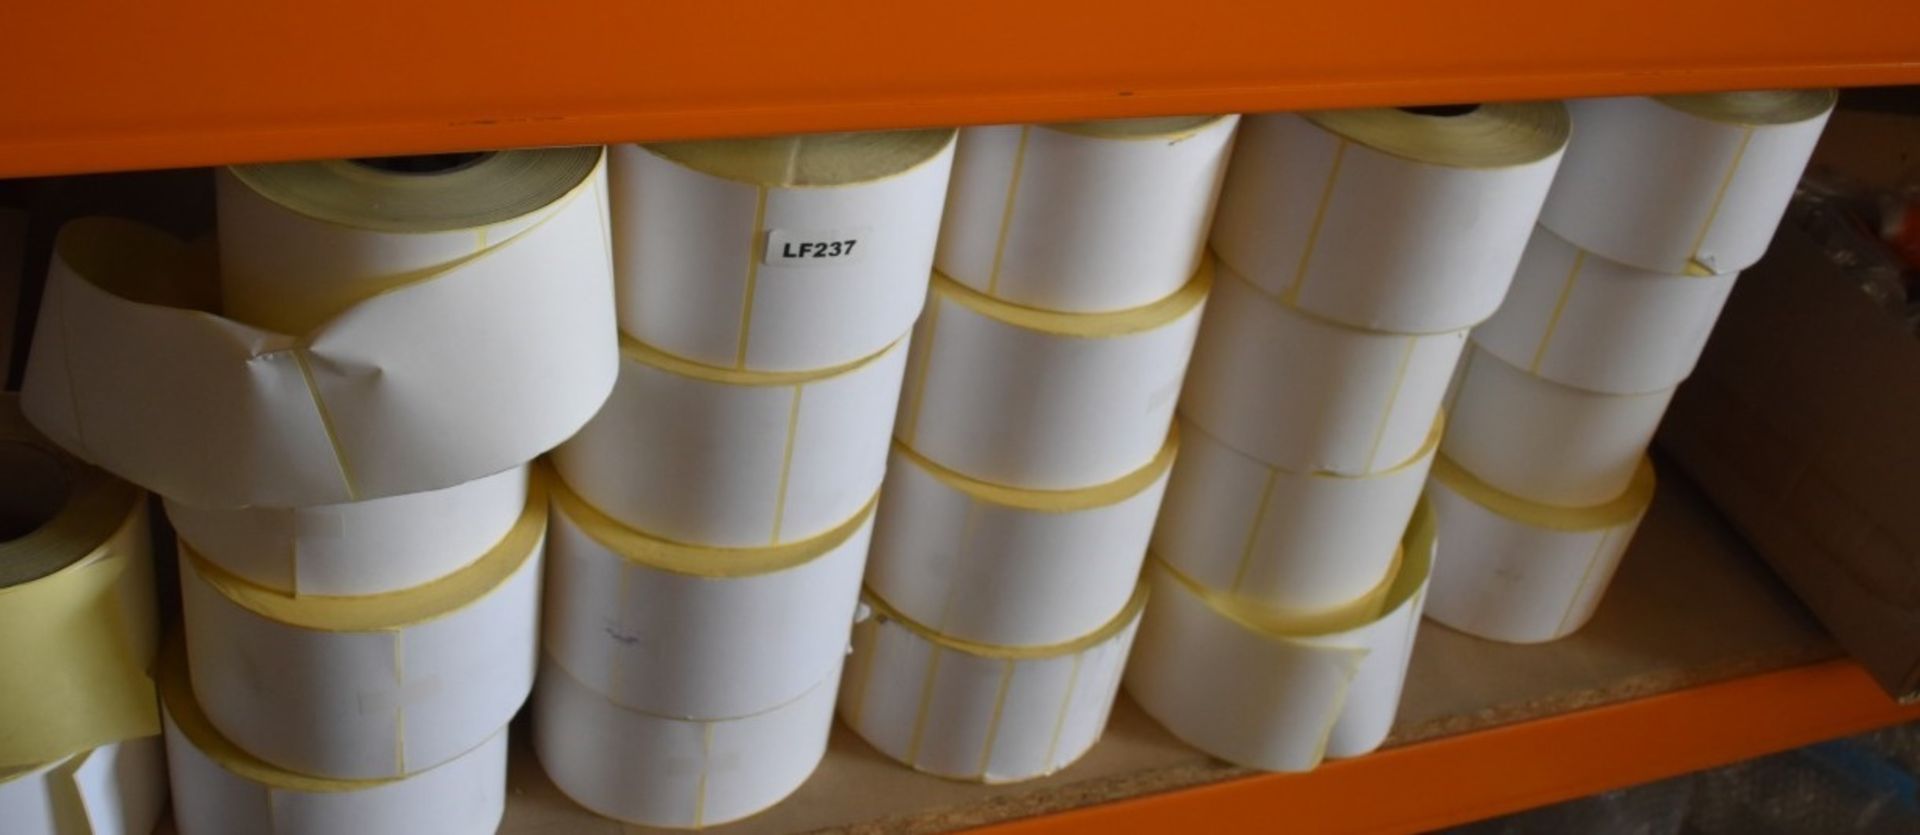 22 x Rolls of Thermal Printer Labels - Image 4 of 5